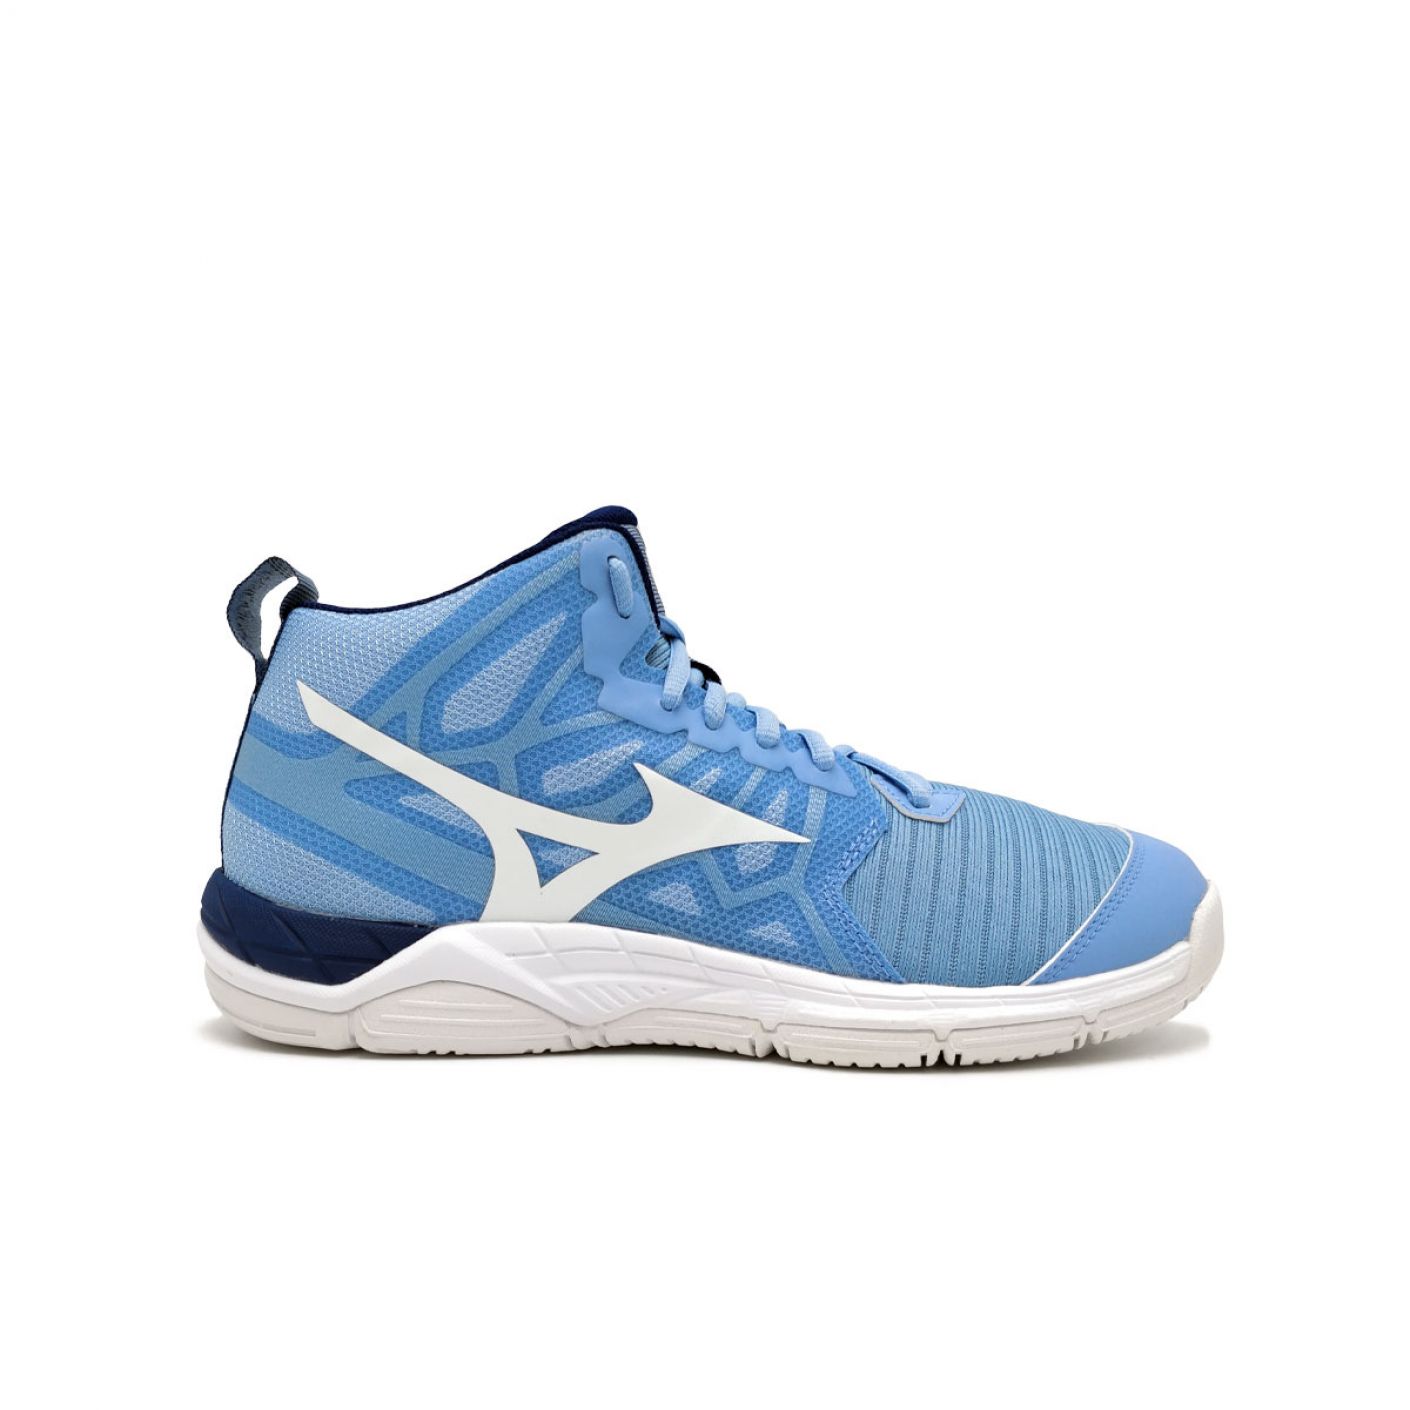 Mizuno Wave Supersonic 2 Mid for Woman Light Blue